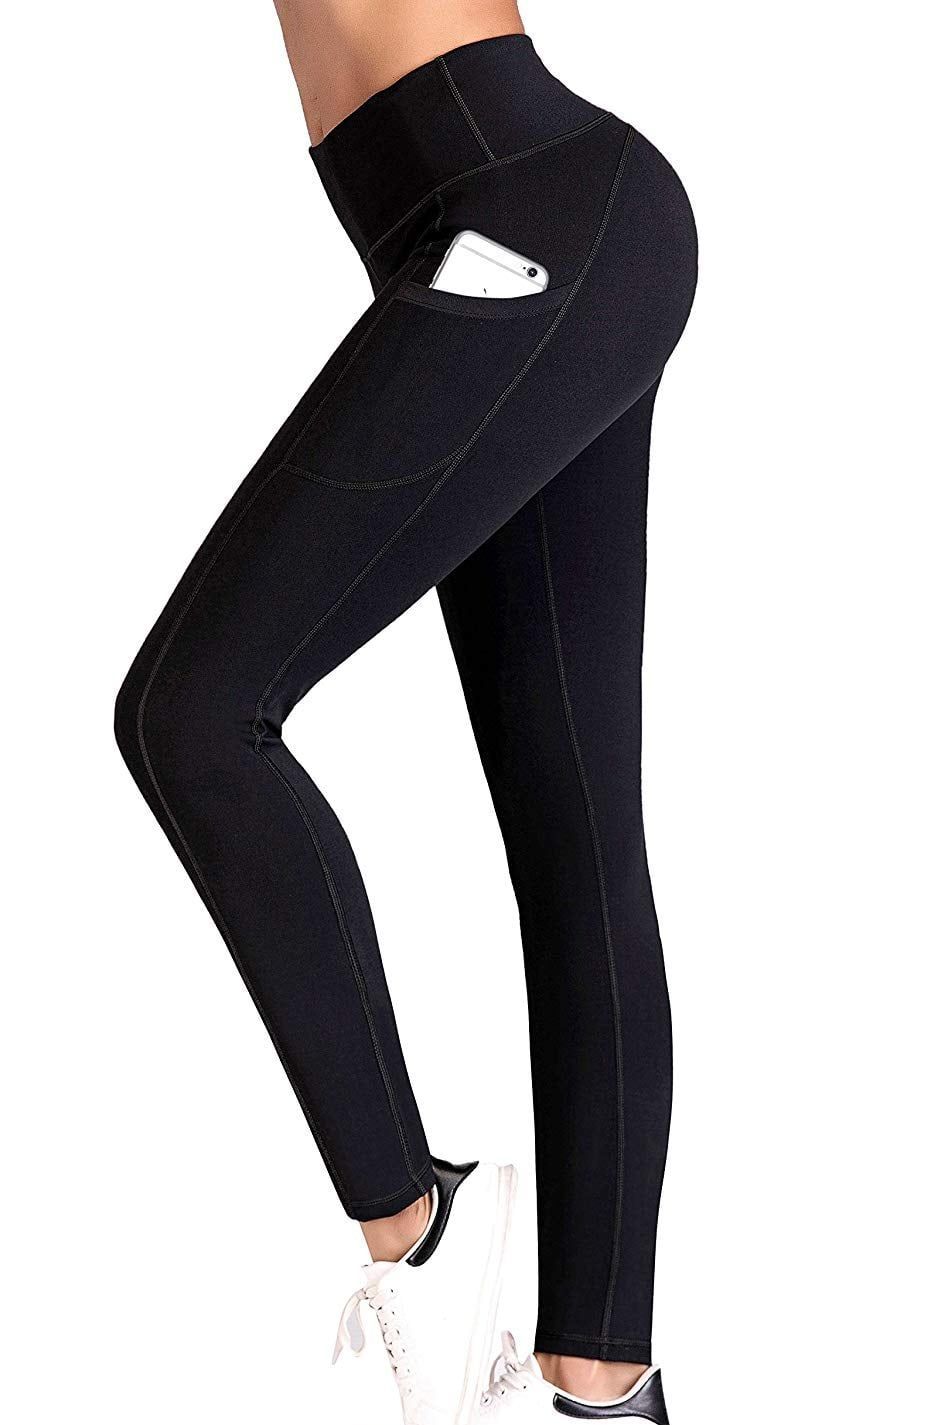 Best Deal for Sheer Yoga Pants Jeans for Women Ripped High Waist Y2K